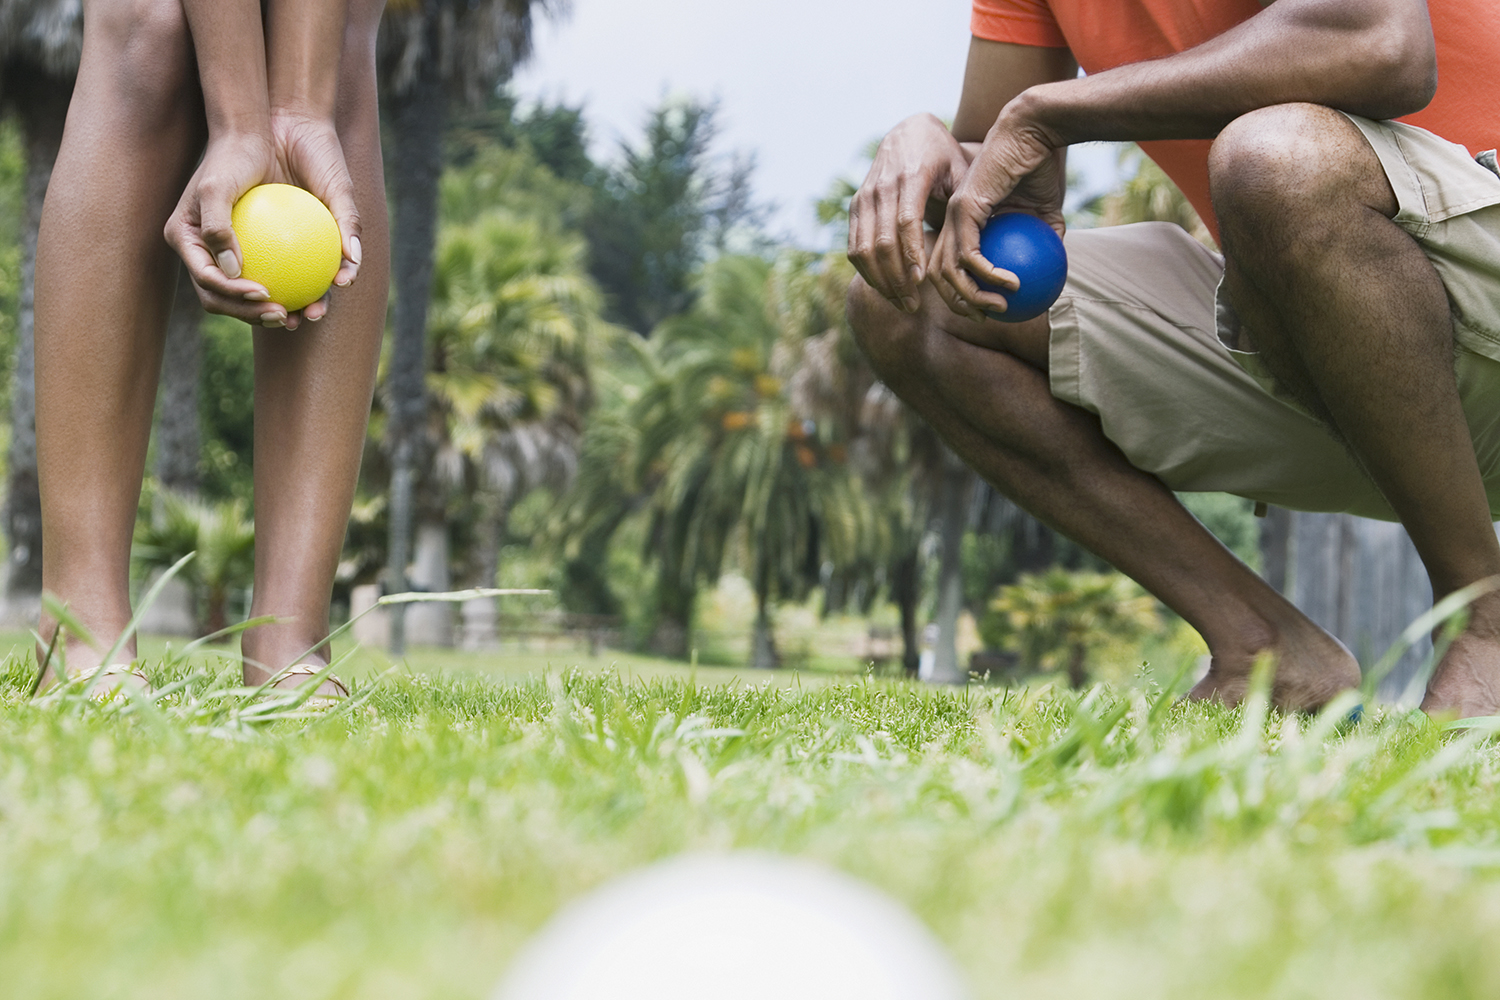 What Is Bocce Ball? Outdoor Games to Play in Your Yard